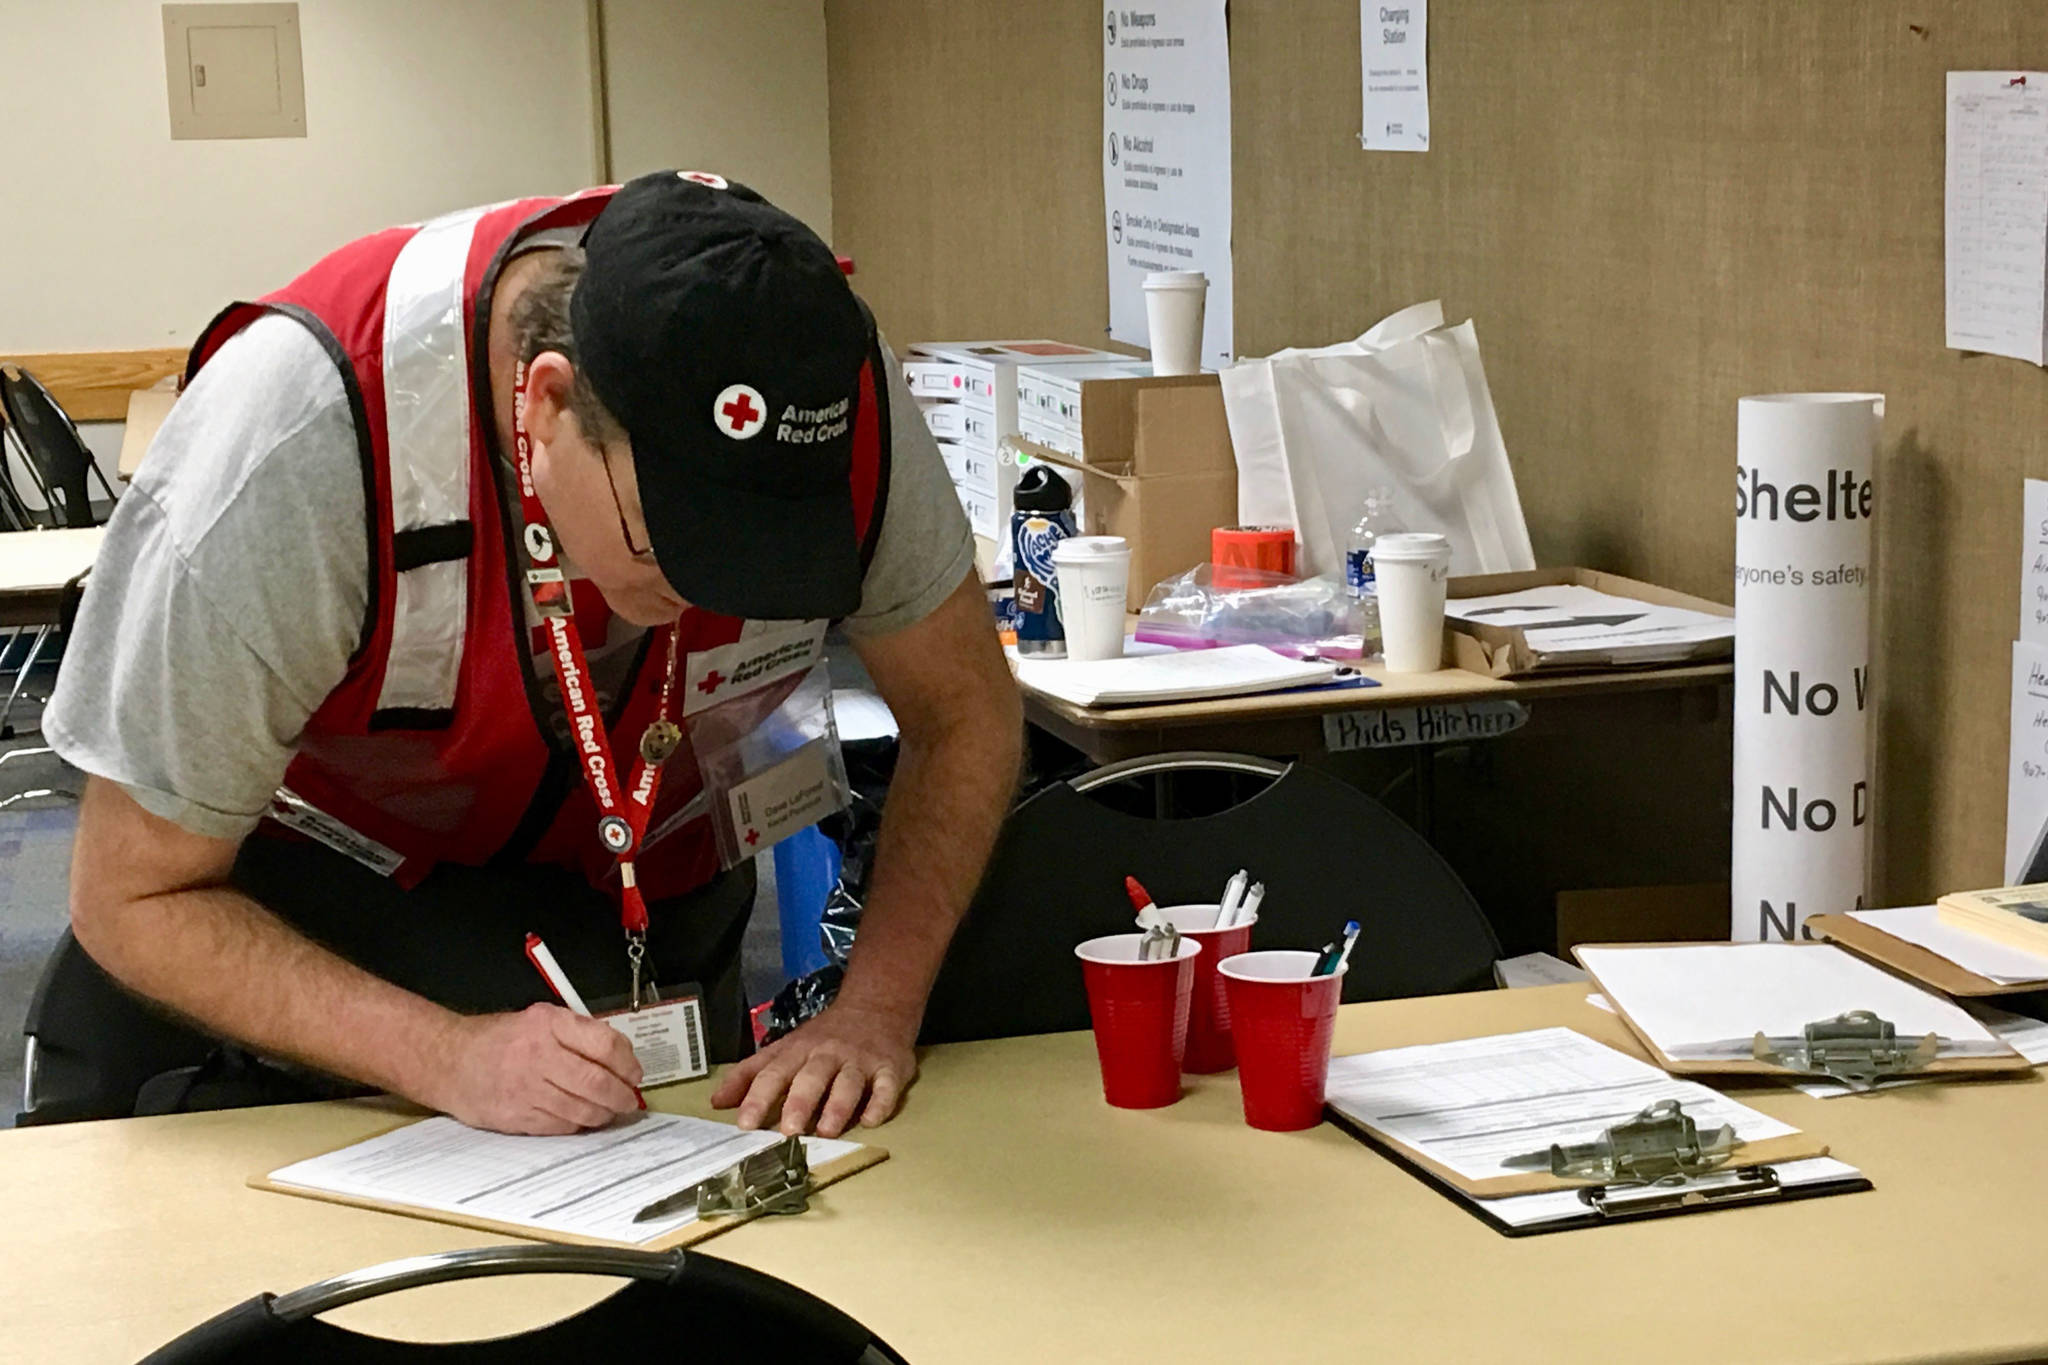 Kenai Peninsula Disaster Action Team Coordinator Dave LaForest assists with sheltering displaced Anchorage residents following the magnitude 7.1 earthquake. (Photo courtesy of Abby Charles/American Red Cross)